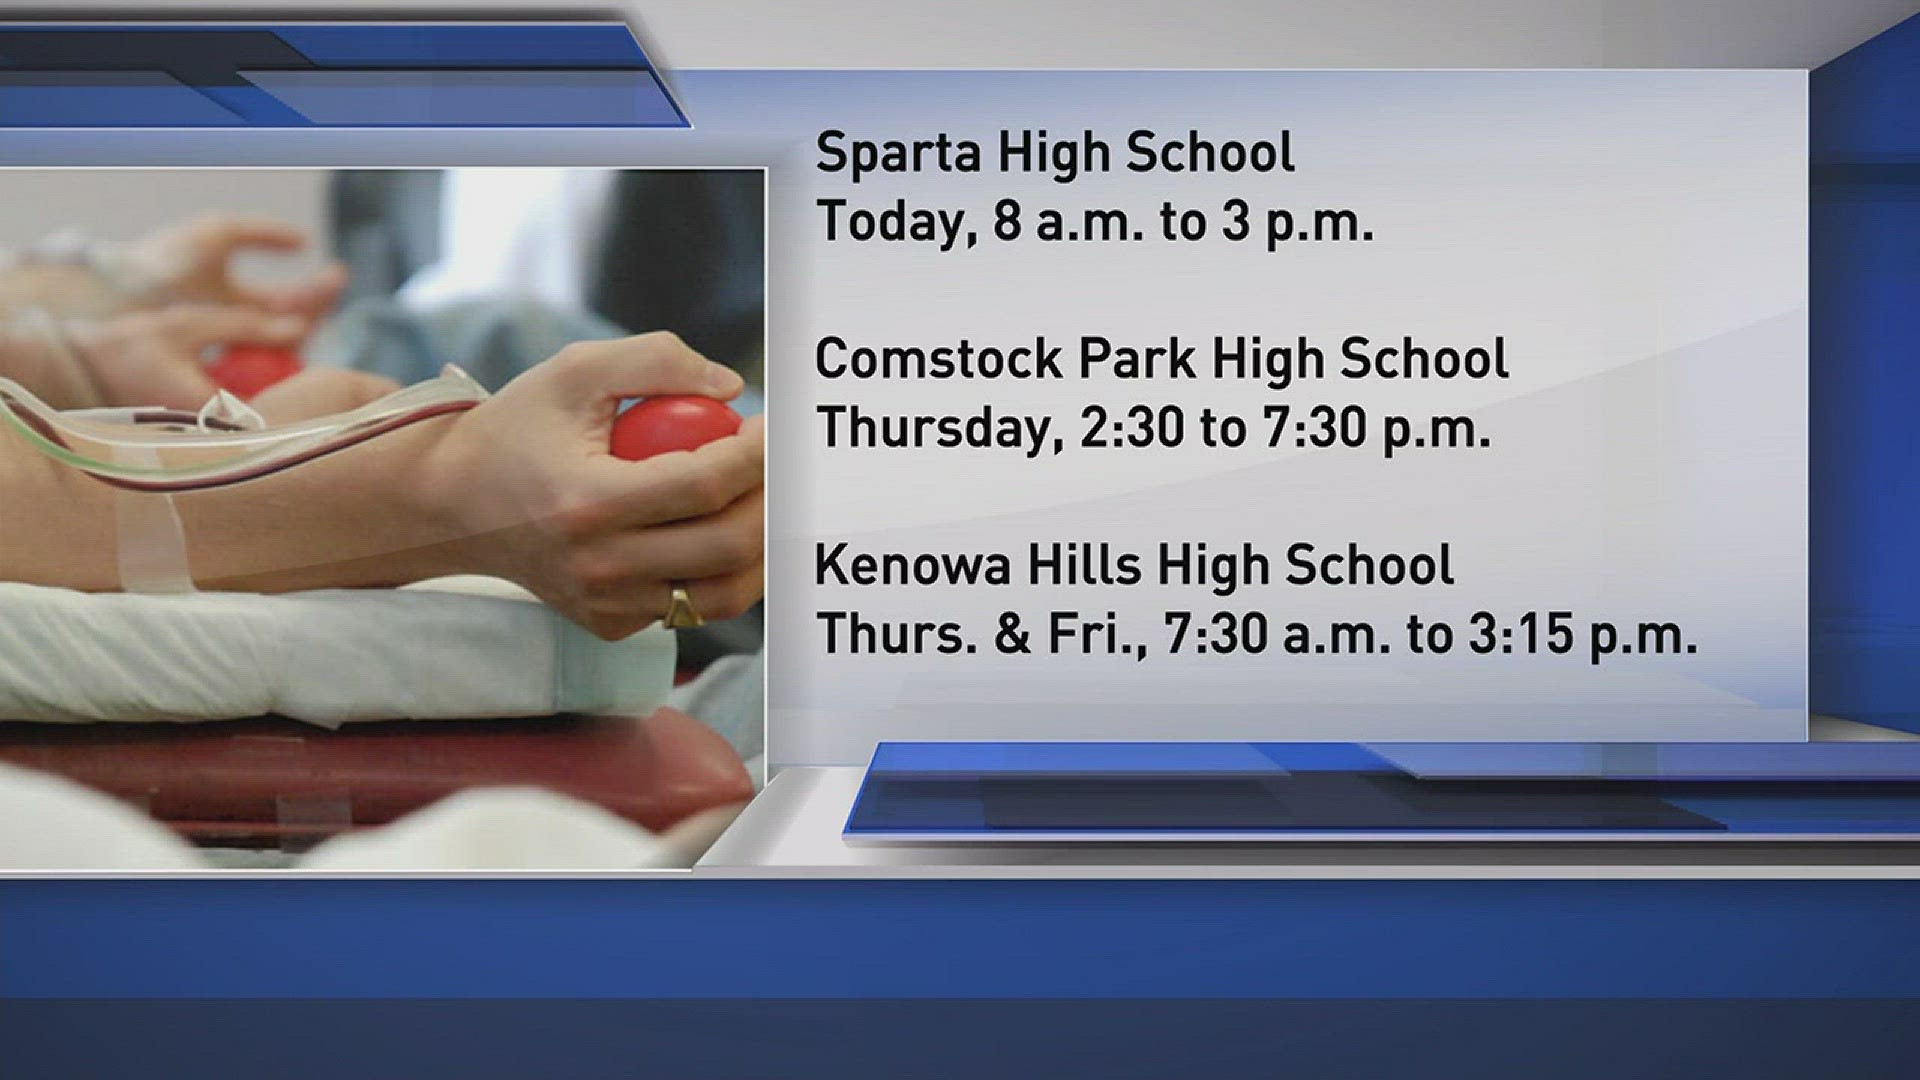 Sparta High School is hosting a blood drive today to honor a student killed in a car accident last year.